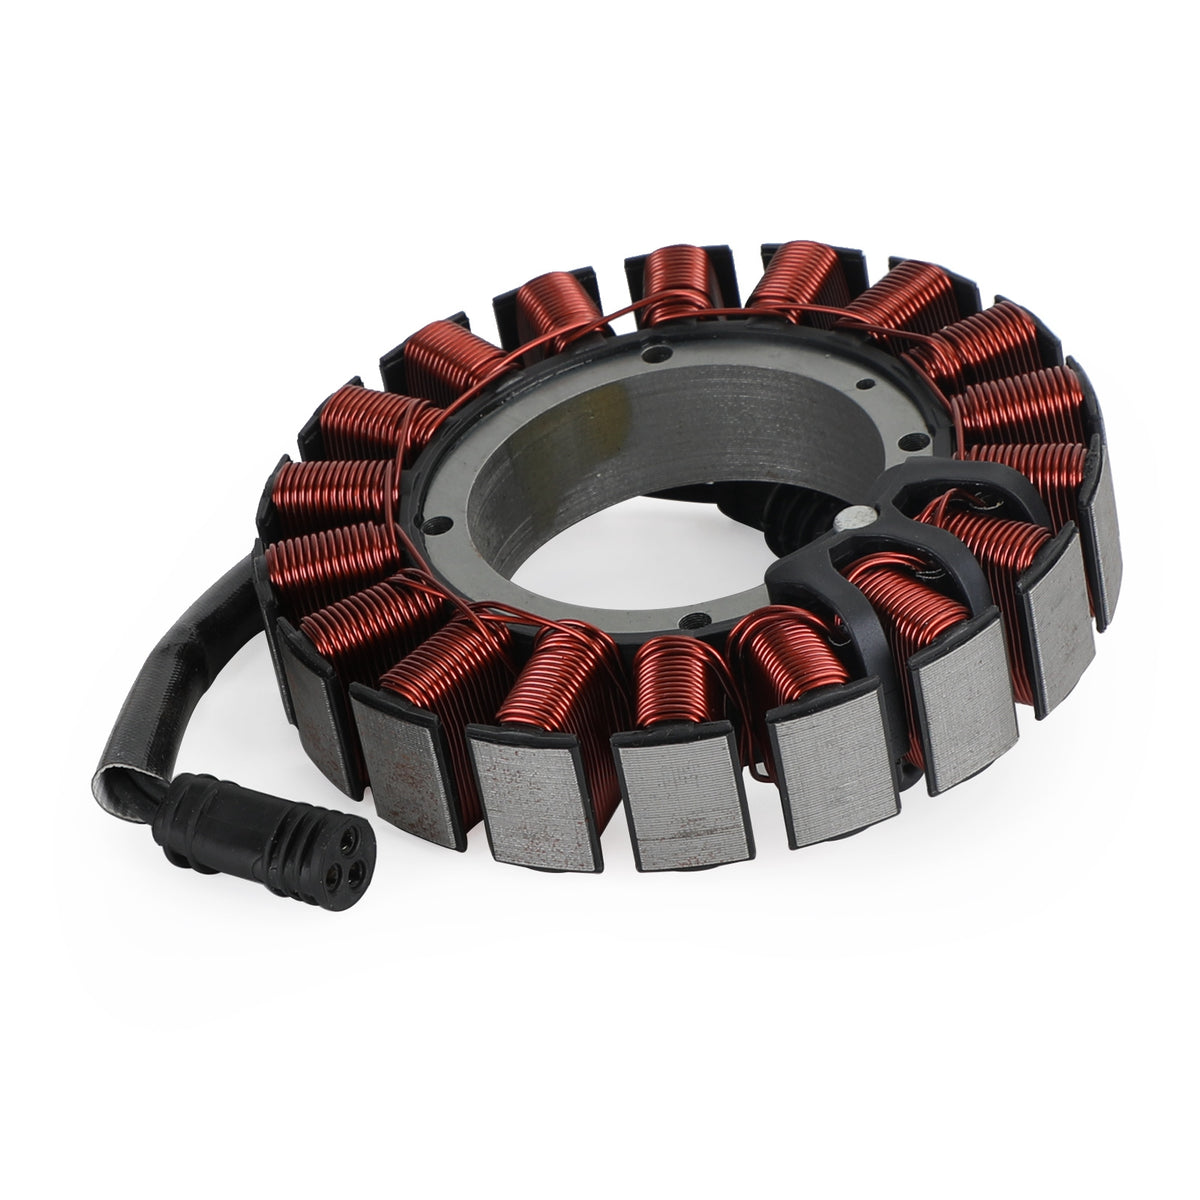 3-Phase 50Amp Stator For Touring 2006-2014 FLT-FLH 29987-06A 29987-06B 29987-06D Generic